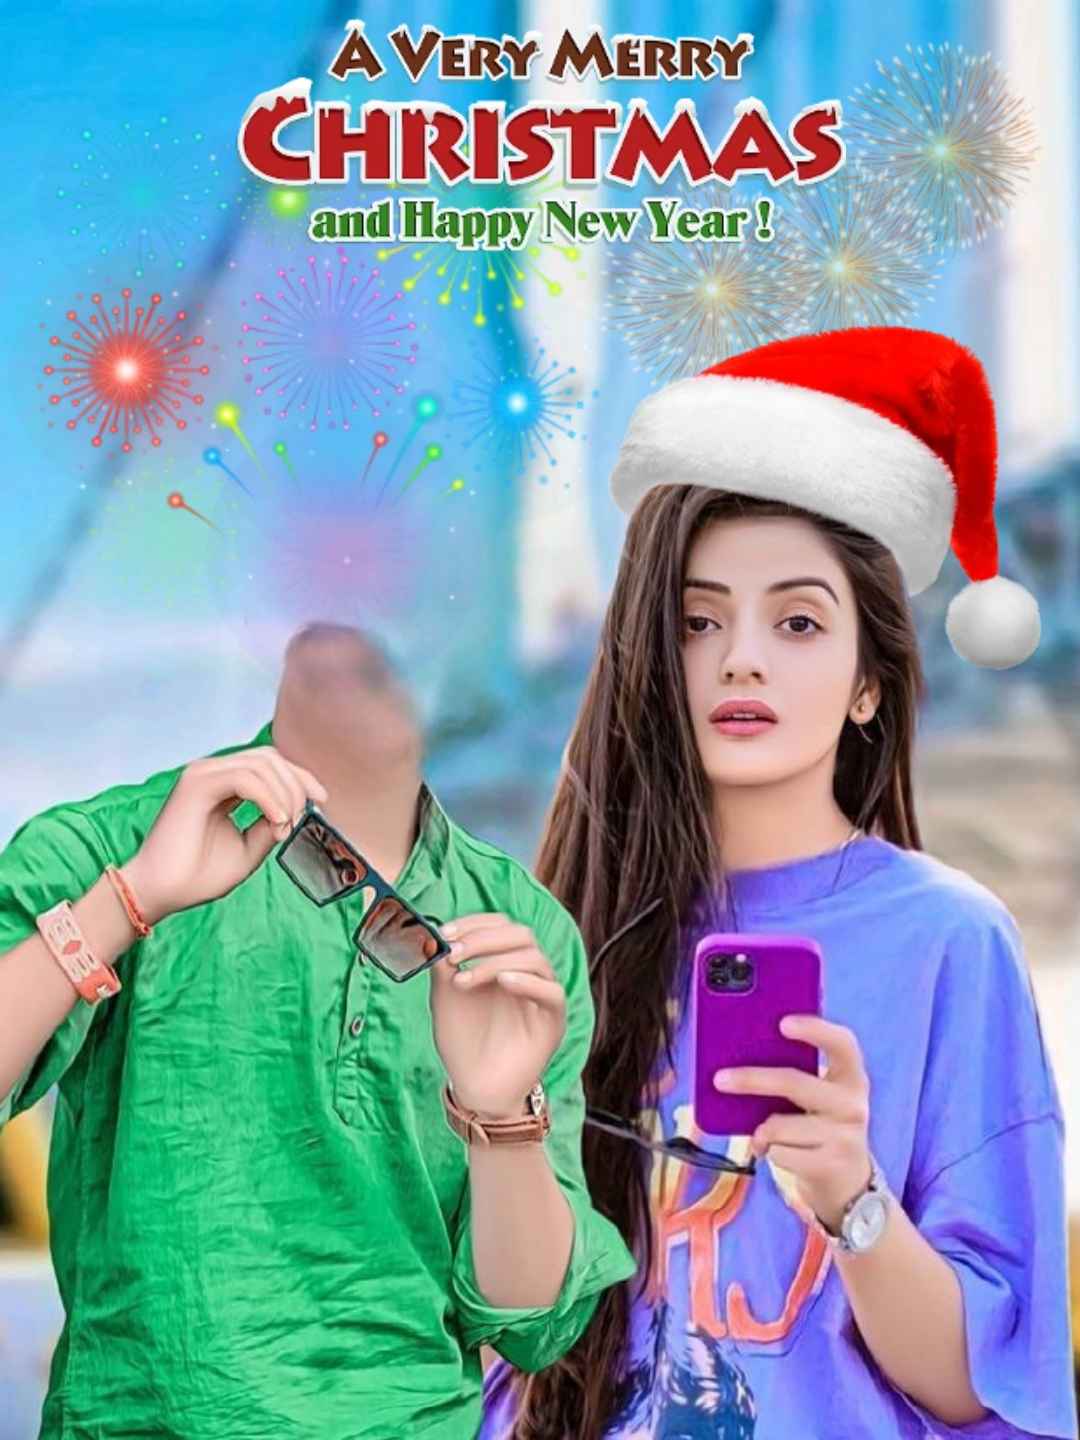 Merry Christmas Photo Editing Background Without Face